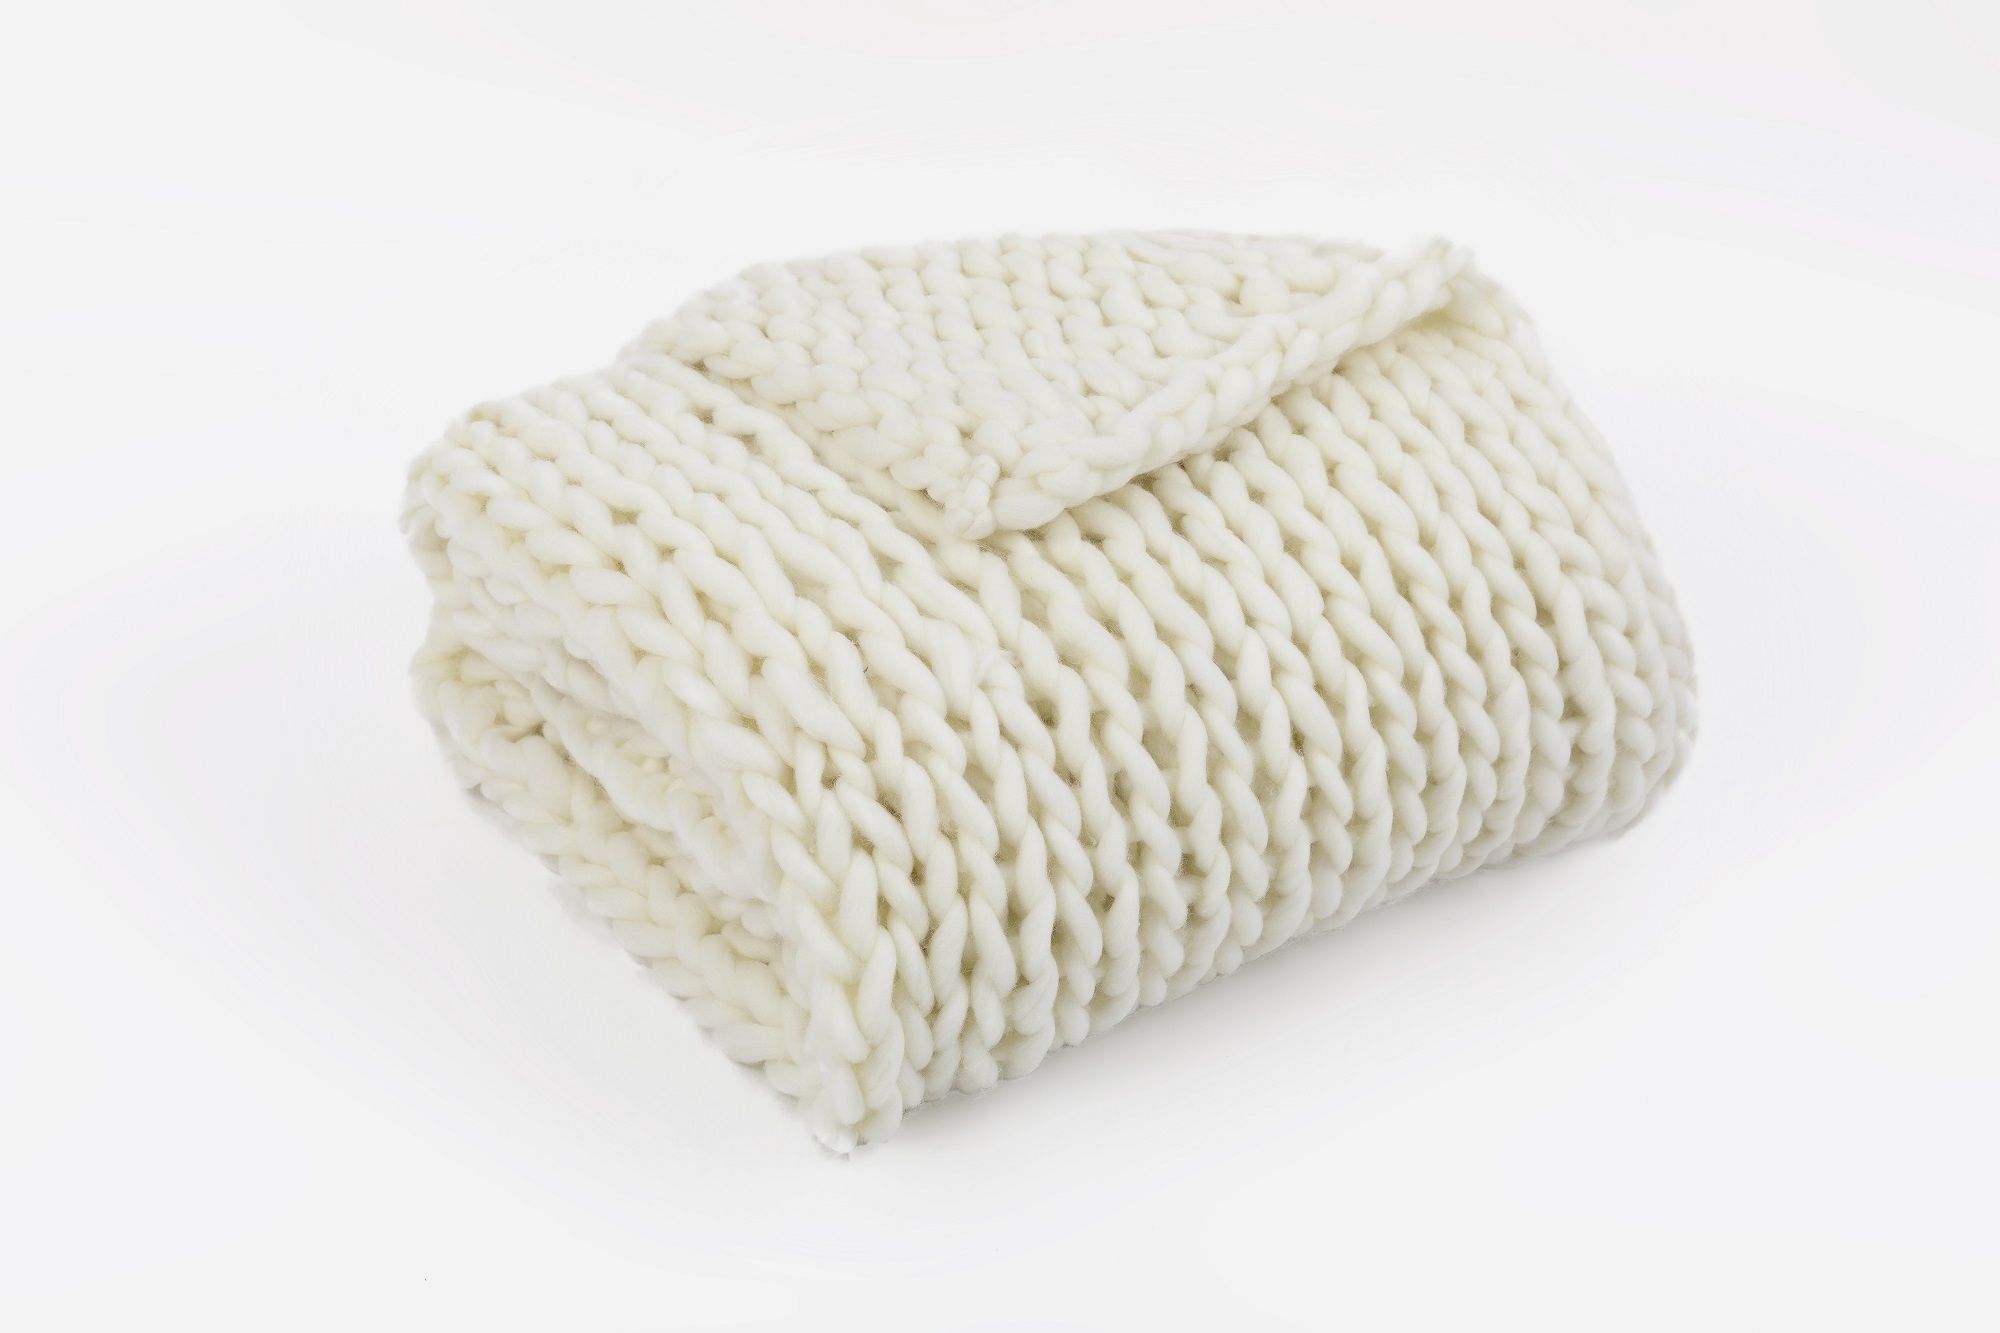 Silver One Chunky Knitted Throw Blanket, Cream, 50" x 60" | Walmart (US)